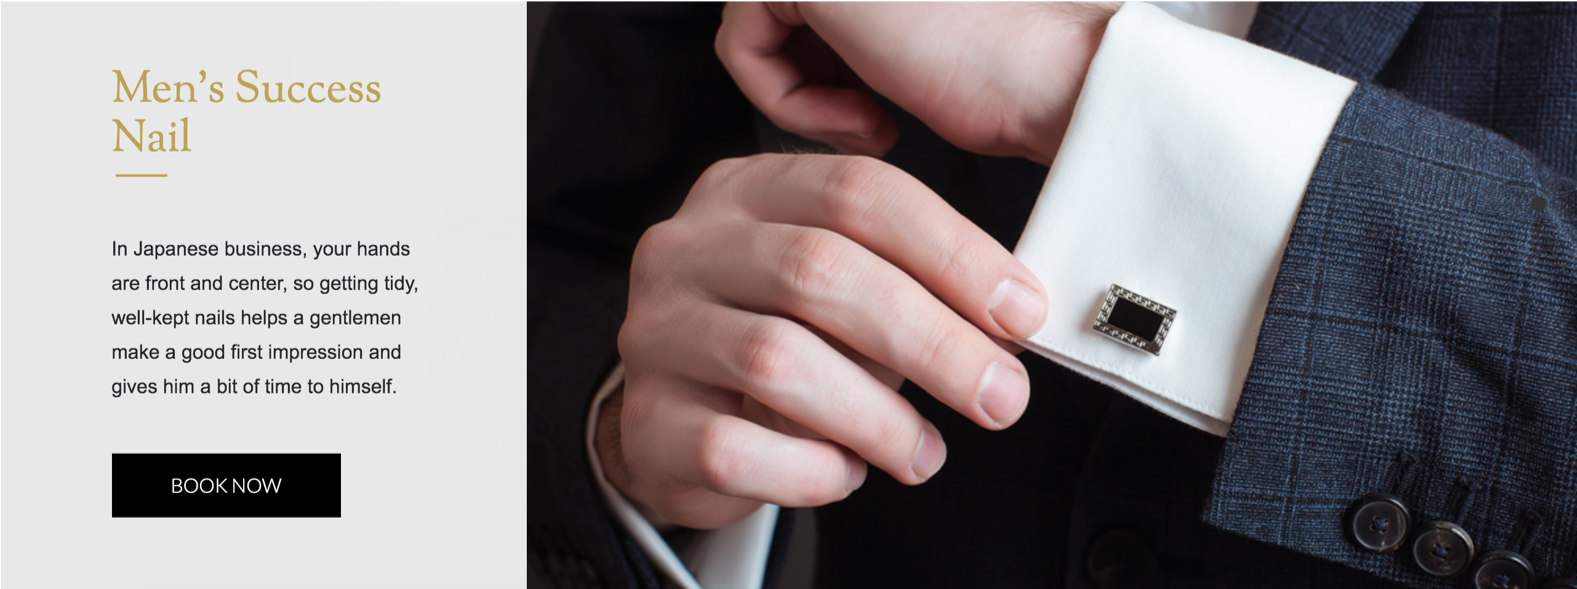 Website page with an image of manicured male hands touching a suit's dress shirt that has cufflinks.